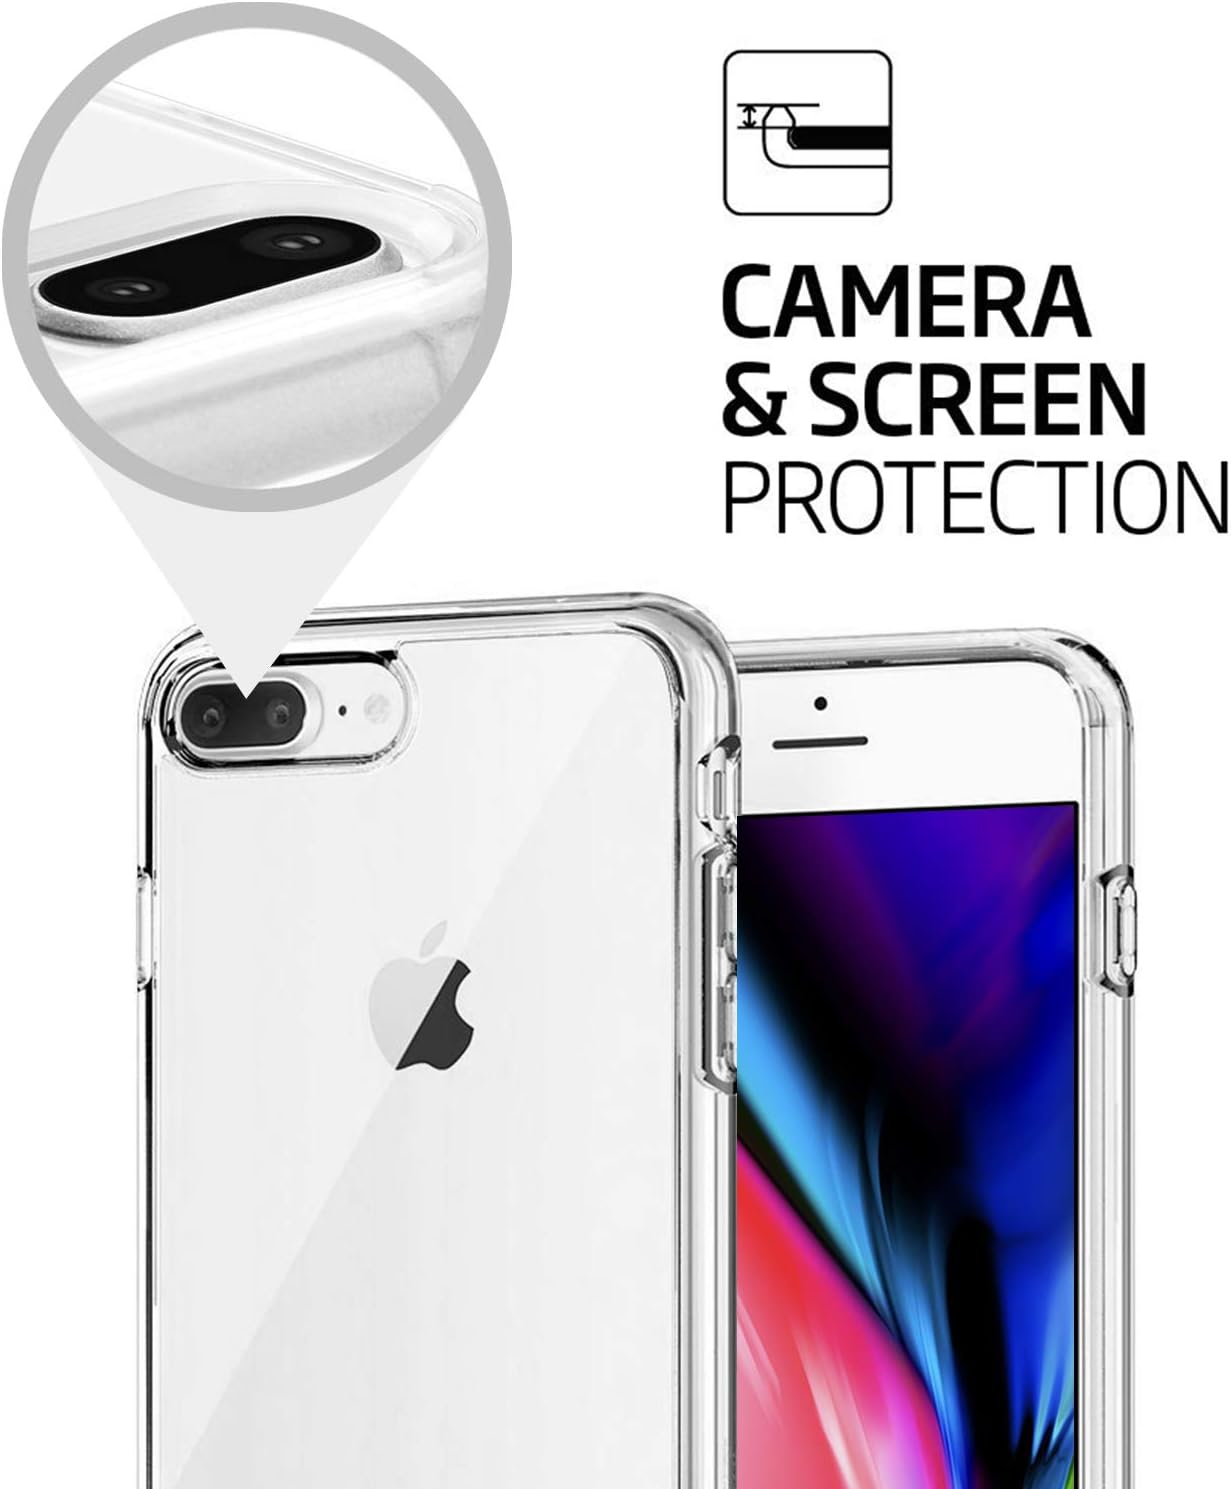 Value Bundle - Case & Screen Protector for iPhone 8 Plus & 7 Plus *Free Shipping*